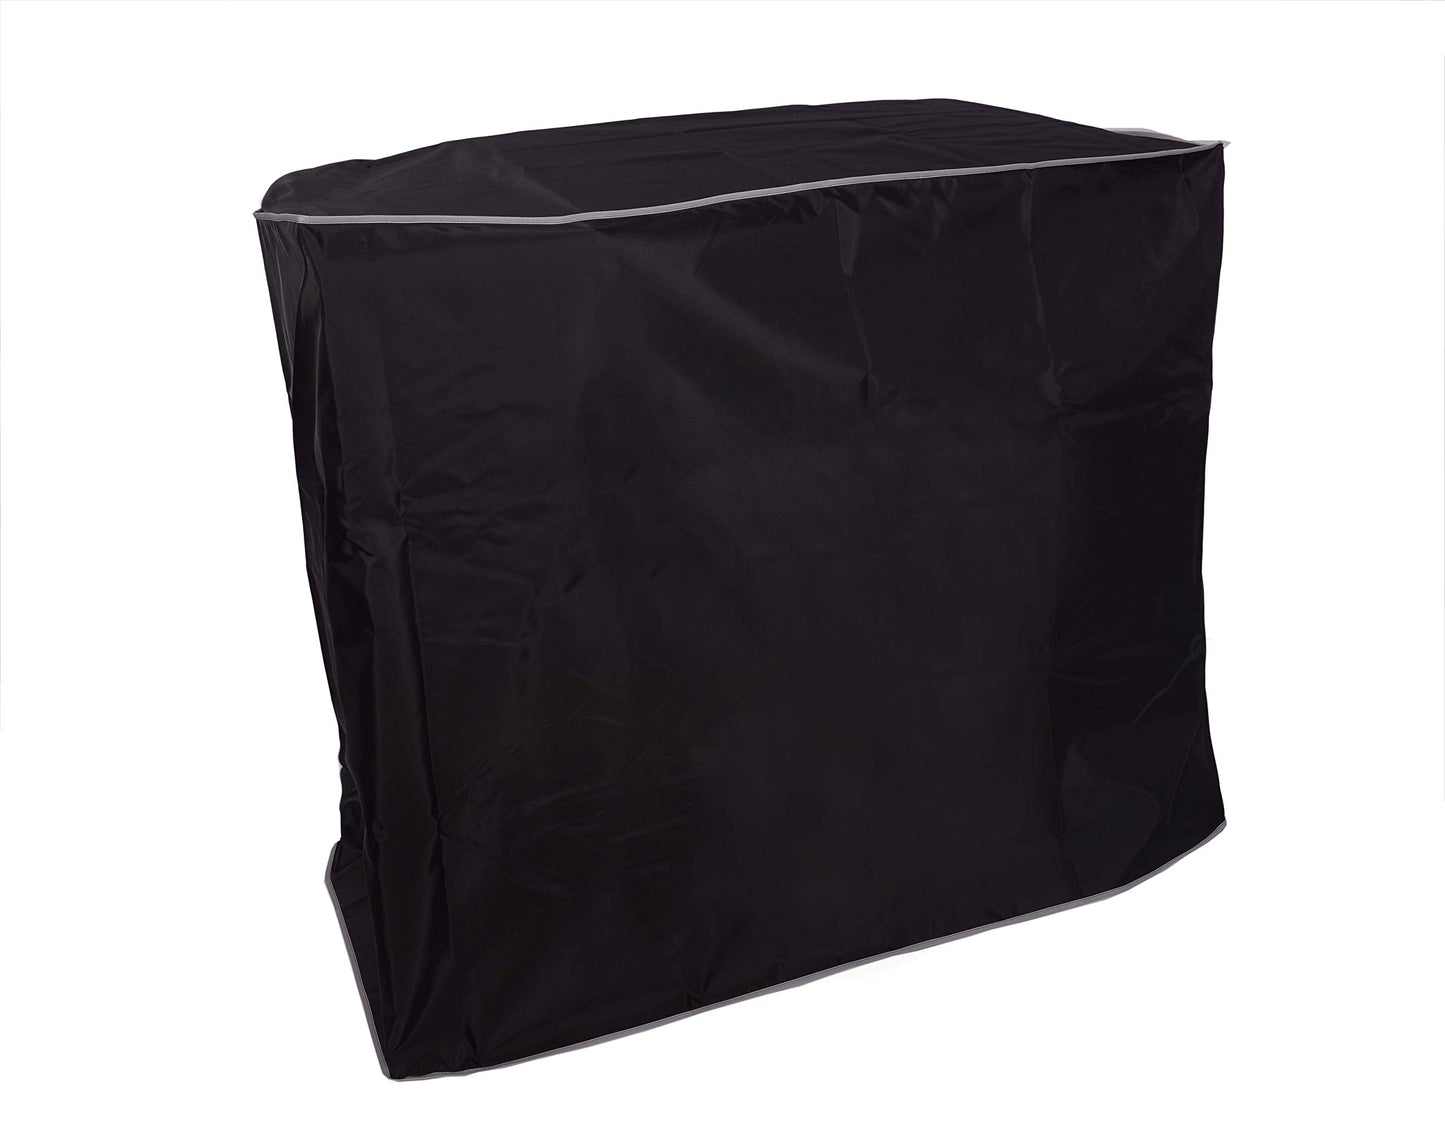 The Perfect Dust Cover, Black Nylon Cover for HP Latex 570 64-in Wide Format Inkjet Printer, Anti Static Waterproof Cover, Dimensions 101''W x 33''D x 56''H by The Perfect Dust Cover LLC